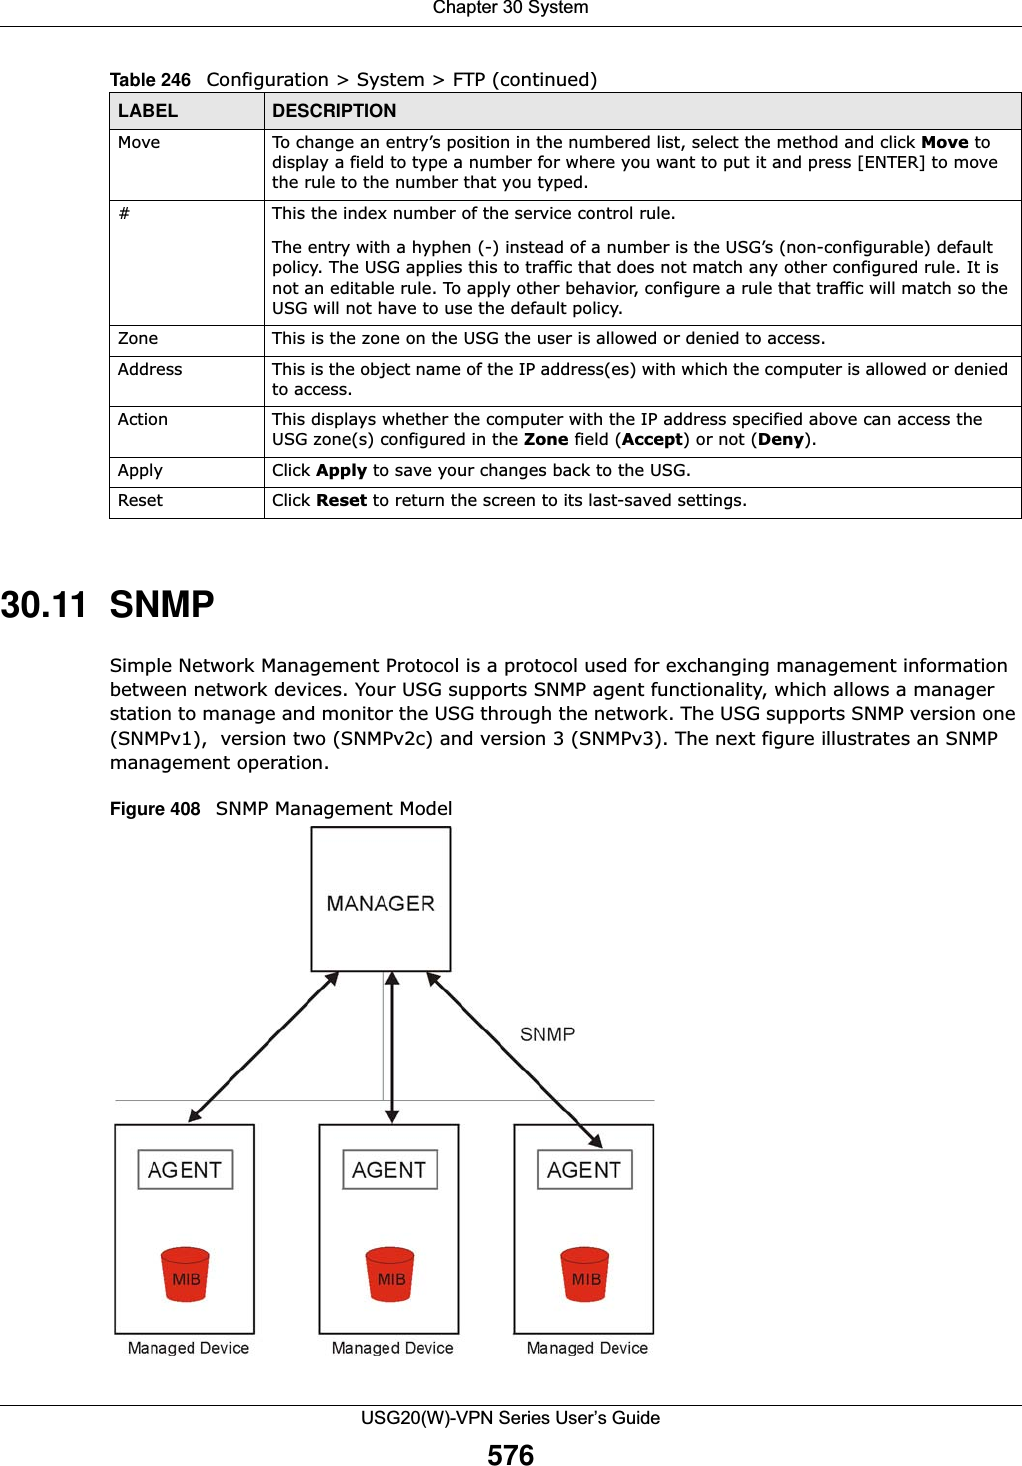 Chapter 30 SystemUSG20(W)-VPN Series User’s Guide57630.11  SNMP Simple Network Management Protocol is a protocol used for exchanging management information between network devices. Your USG supports SNMP agent functionality, which allows a manager station to manage and monitor the USG through the network. The USG supports SNMP version one (SNMPv1),  version two (SNMPv2c) and version 3 (SNMPv3). The next figure illustrates an SNMP management operation.   Figure 408   SNMP Management ModelMove To change an entry’s position in the numbered list, select the method and click Move to display a field to type a number for where you want to put it and press [ENTER] to move the rule to the number that you typed.#This the index number of the service control rule.The entry with a hyphen (-) instead of a number is the USG’s (non-configurable) default policy. The USG applies this to traffic that does not match any other configured rule. It is not an editable rule. To apply other behavior, configure a rule that traffic will match so the USG will not have to use the default policy.Zone This is the zone on the USG the user is allowed or denied to access.Address This is the object name of the IP address(es) with which the computer is allowed or denied to access.Action This displays whether the computer with the IP address specified above can access the USG zone(s) configured in the Zone field (Accept) or not (Deny).Apply Click Apply to save your changes back to the USG. Reset Click Reset to return the screen to its last-saved settings. Table 246   Configuration &gt; System &gt; FTP (continued)LABEL DESCRIPTION